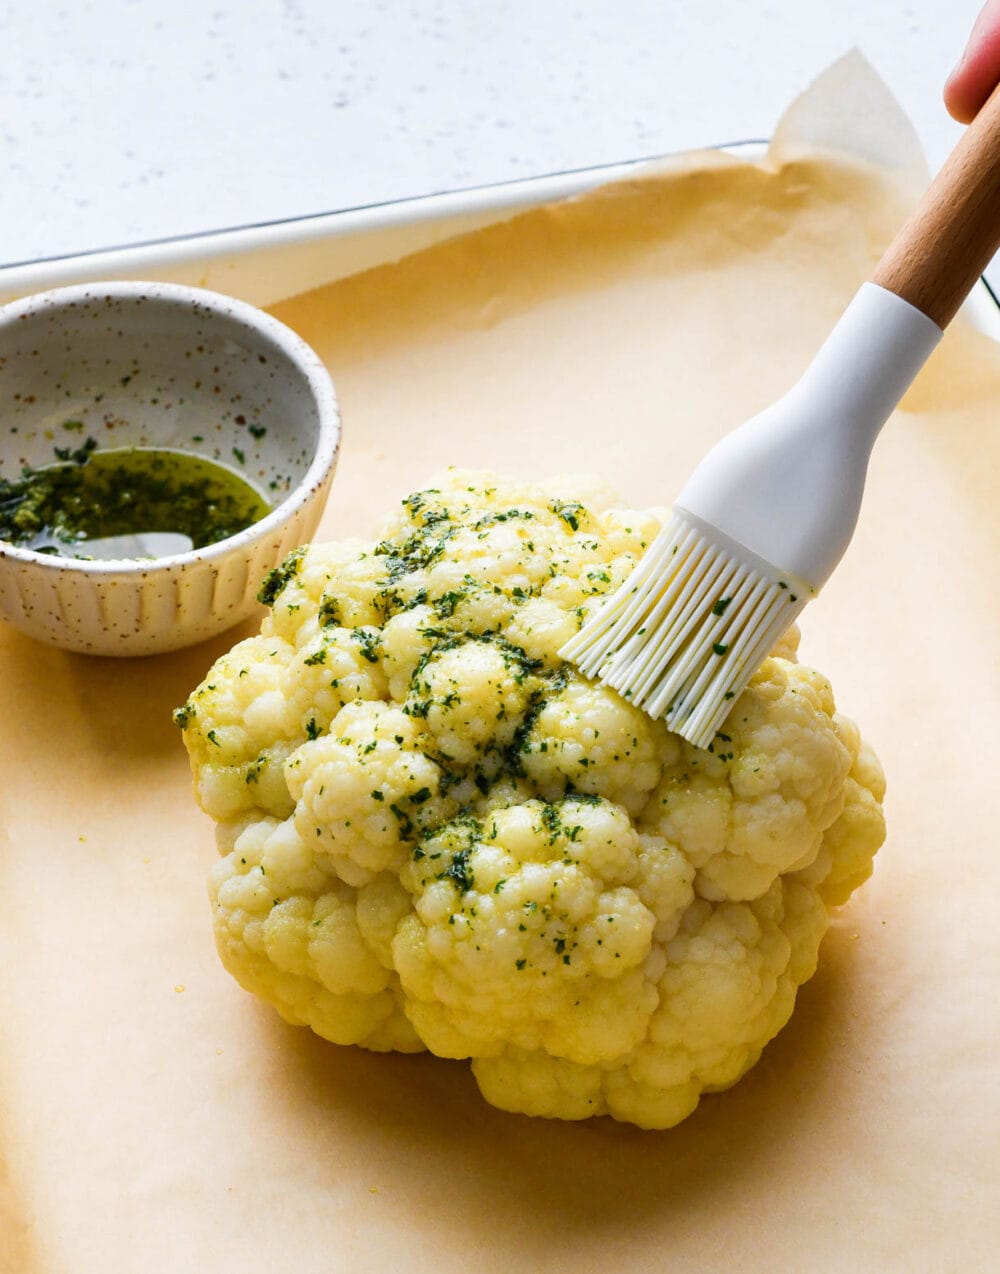 brushing raw cauliflower with olive oil and herbs